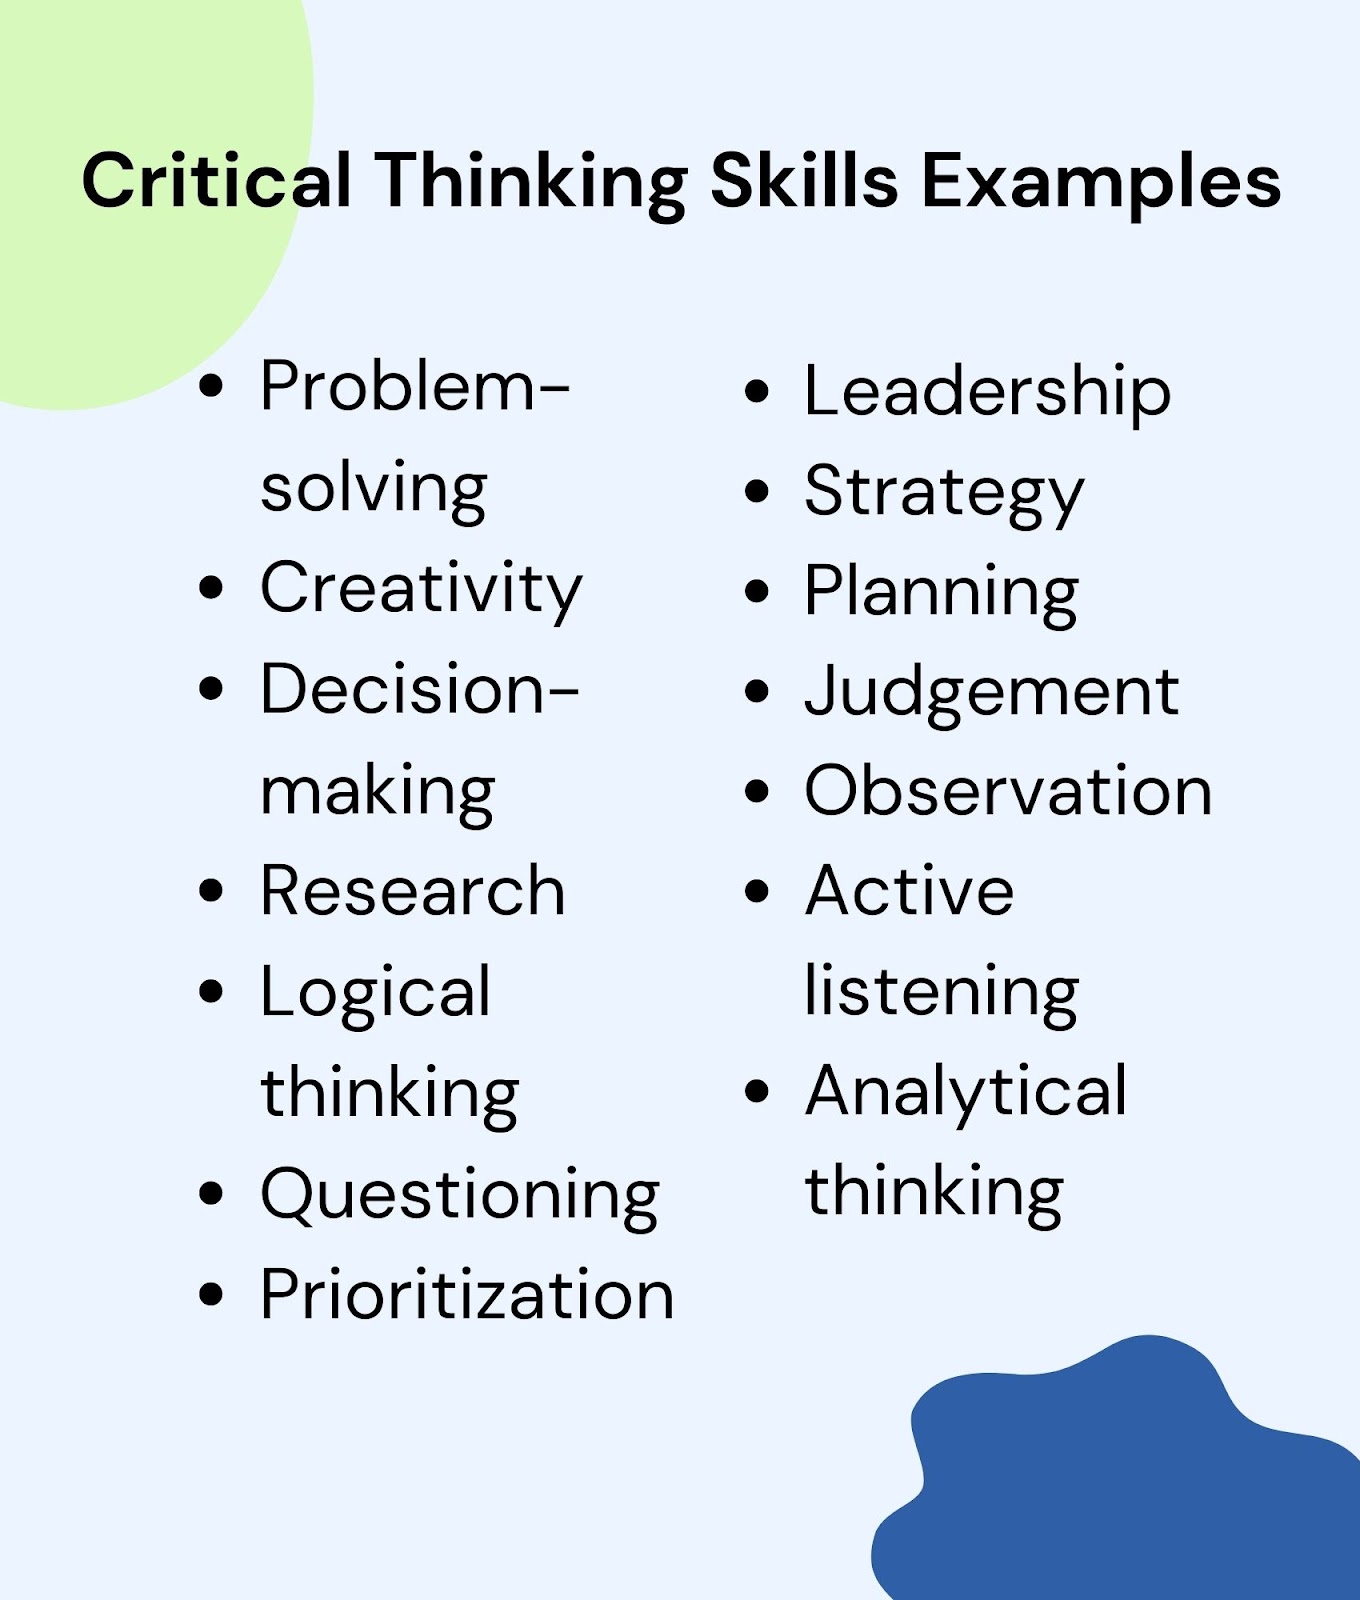 what is needed to build critical thinking skills